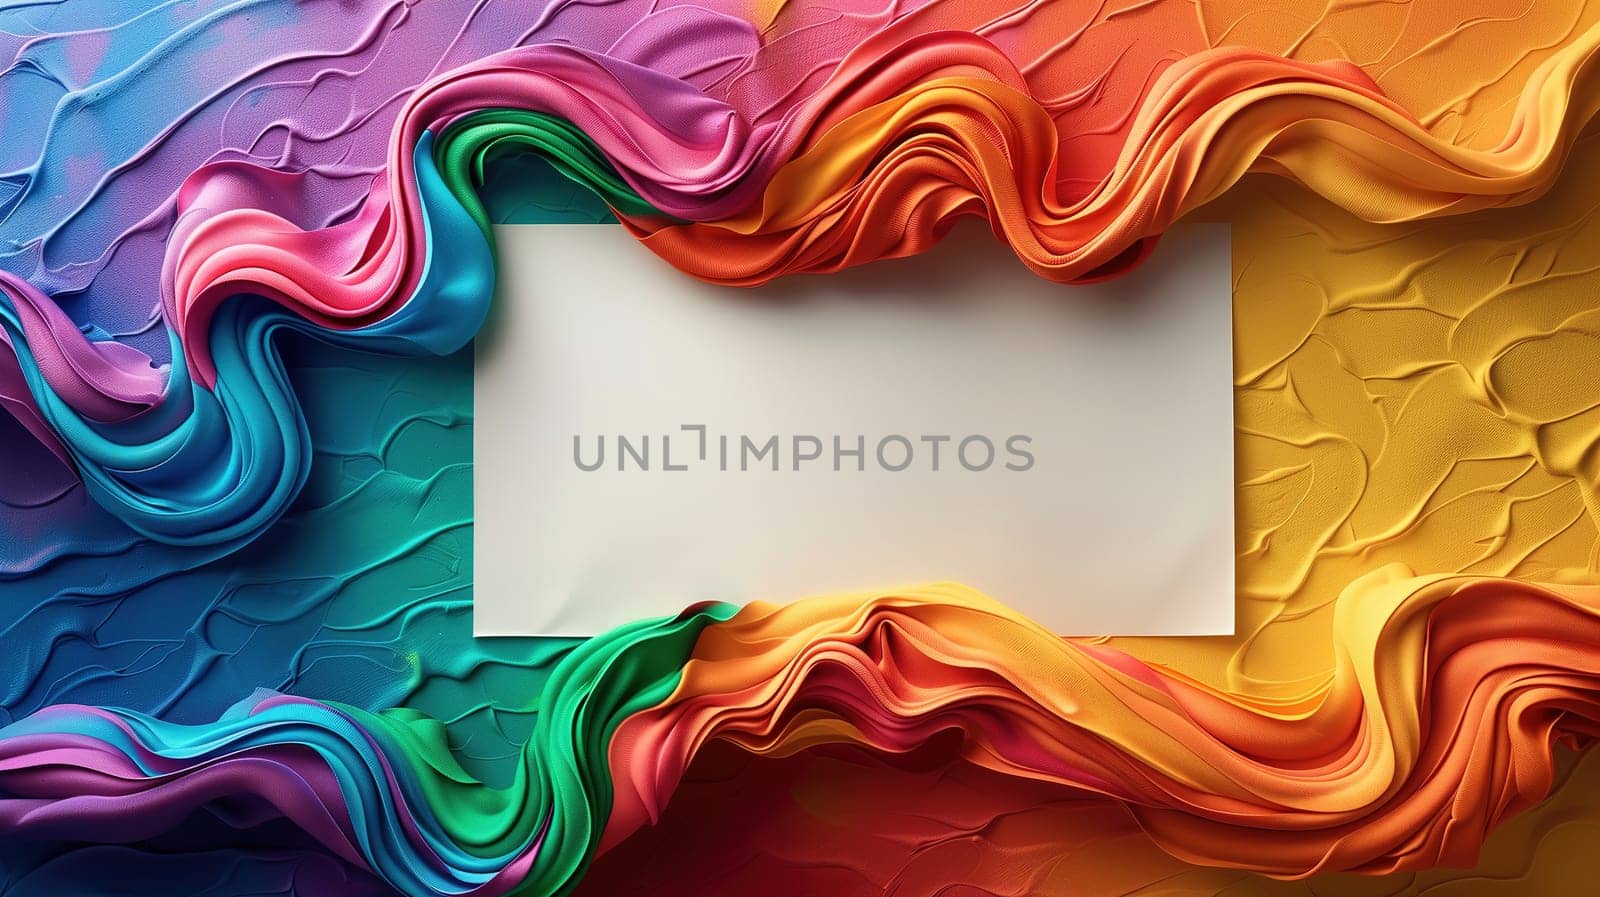 Vibrant, wavy textures in the colors of the rainbow create a dynamic frame around a central blank space, symbolizing inclusivity and diversity associated with LGBT pride.